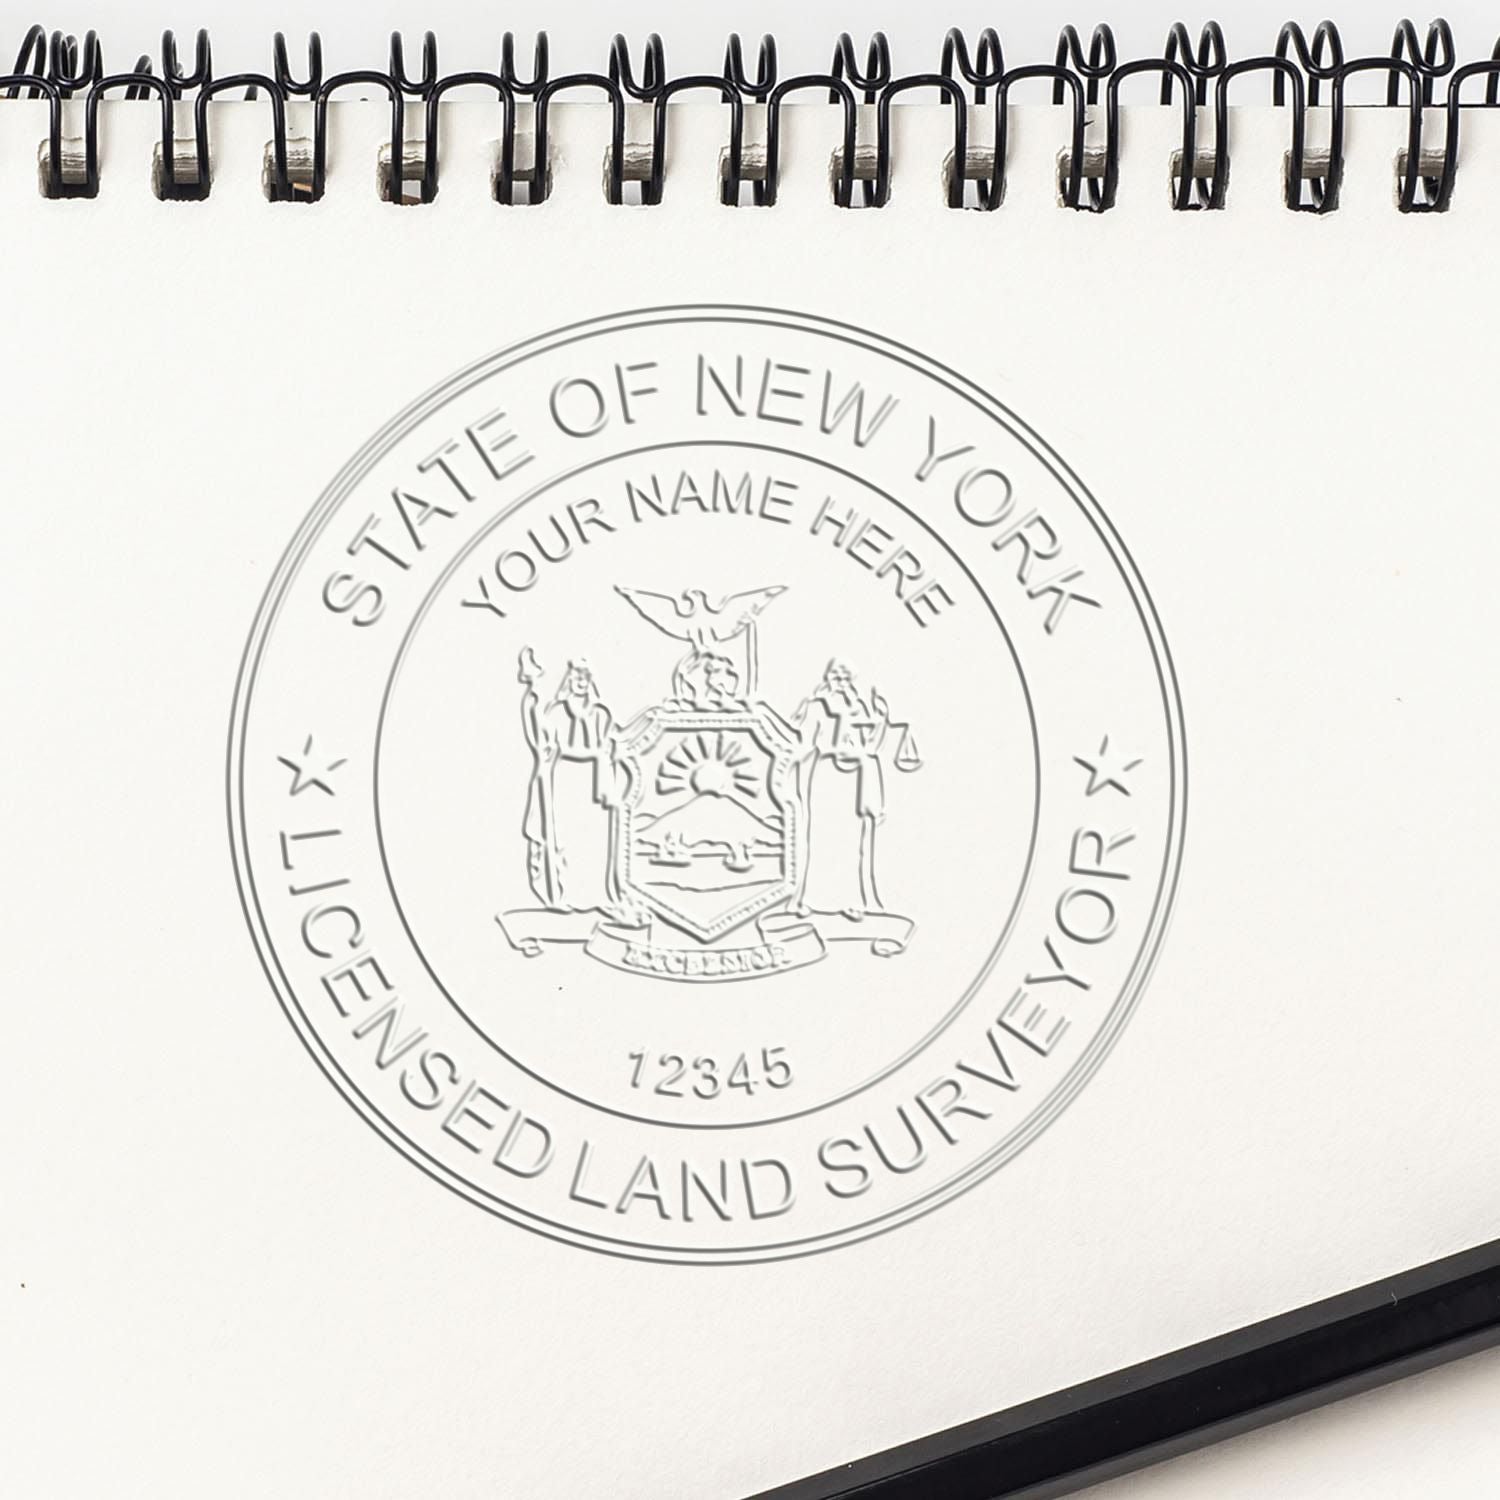 A stamped impression of the Long Reach New York Land Surveyor Seal in this stylish lifestyle photo, setting the tone for a unique and personalized product.